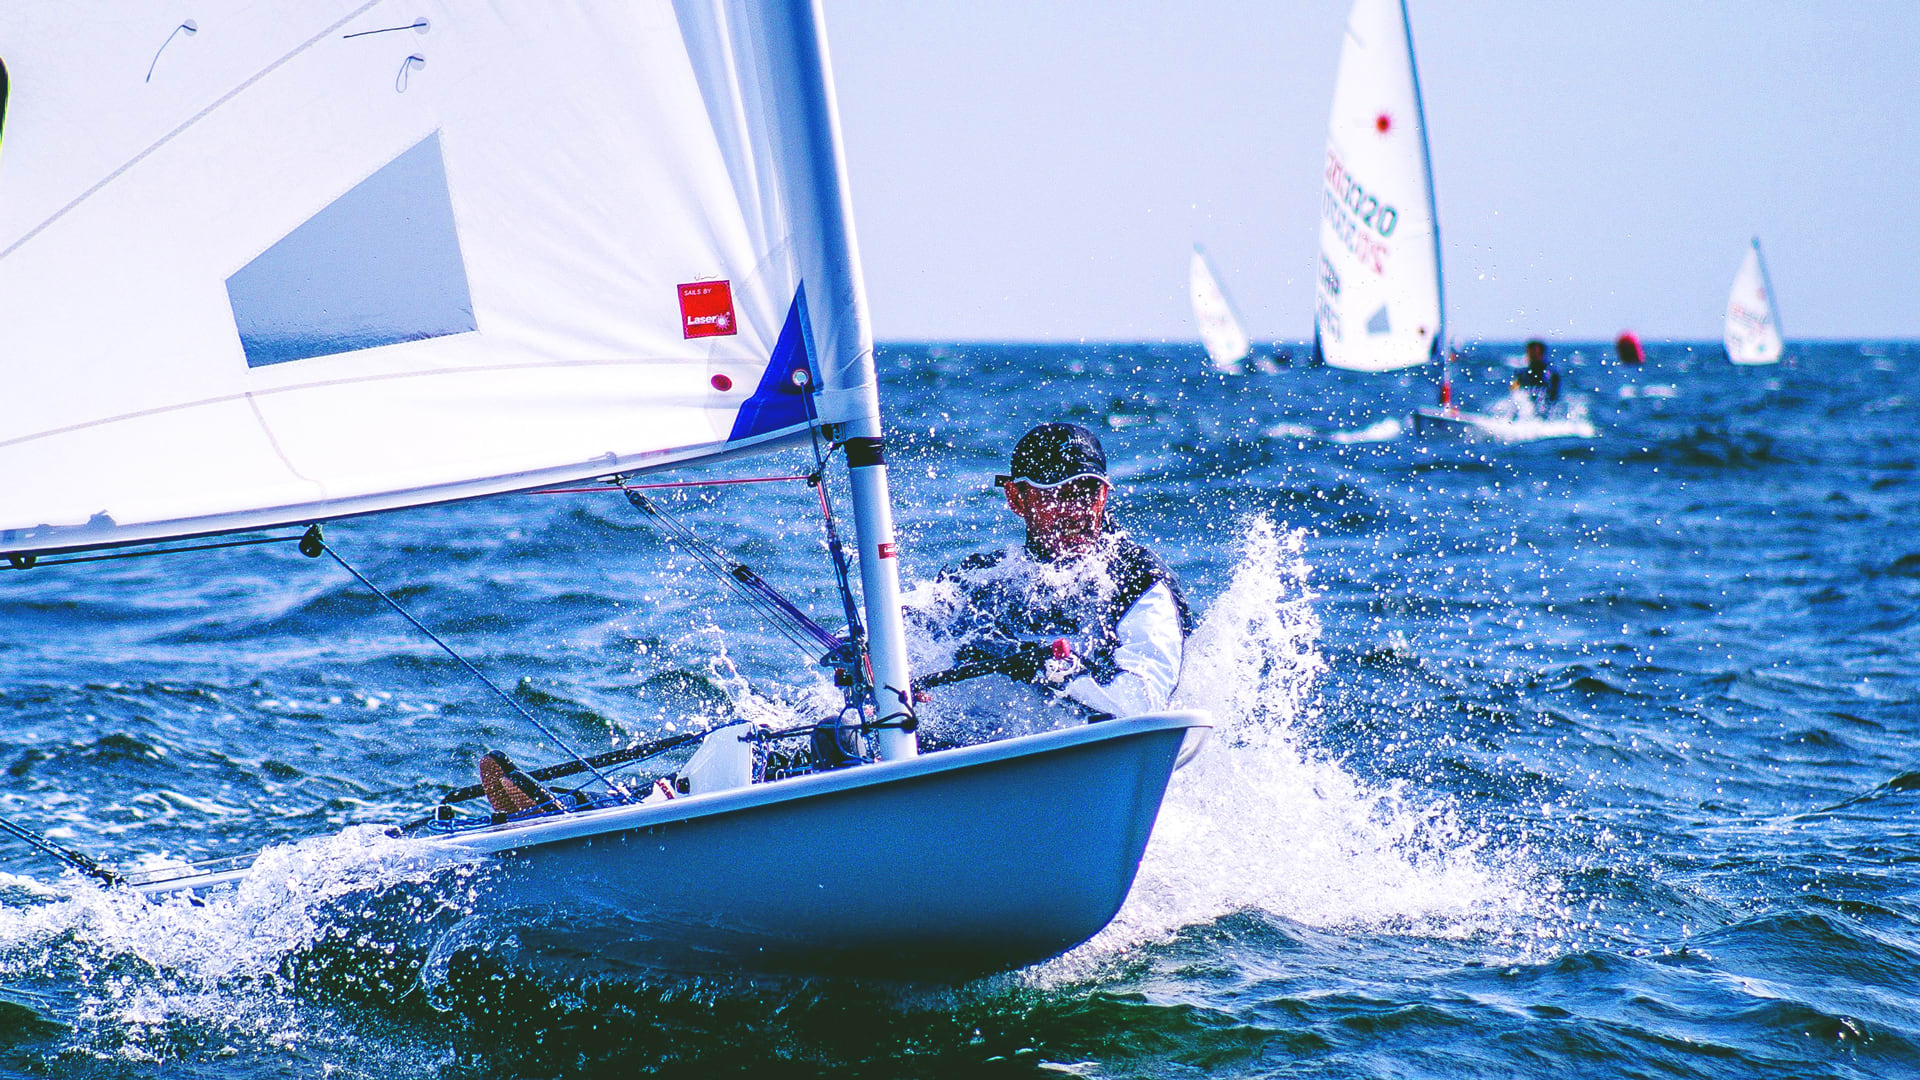 6 lessons in teamwork leaders can learn from competitive sailing